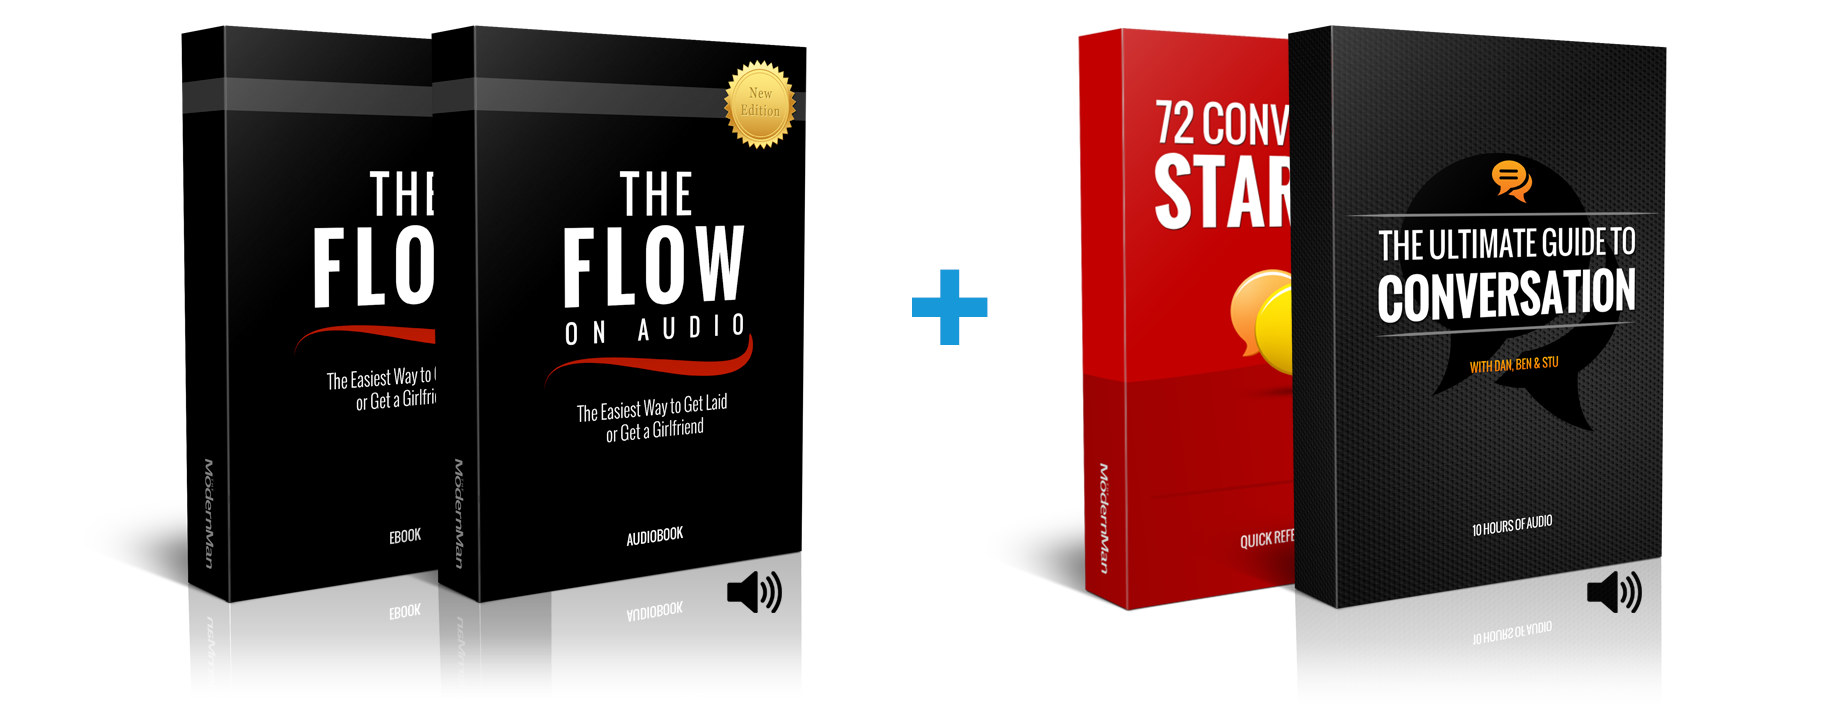 The Flow & The Ultimate Guide to Conversation discount pack